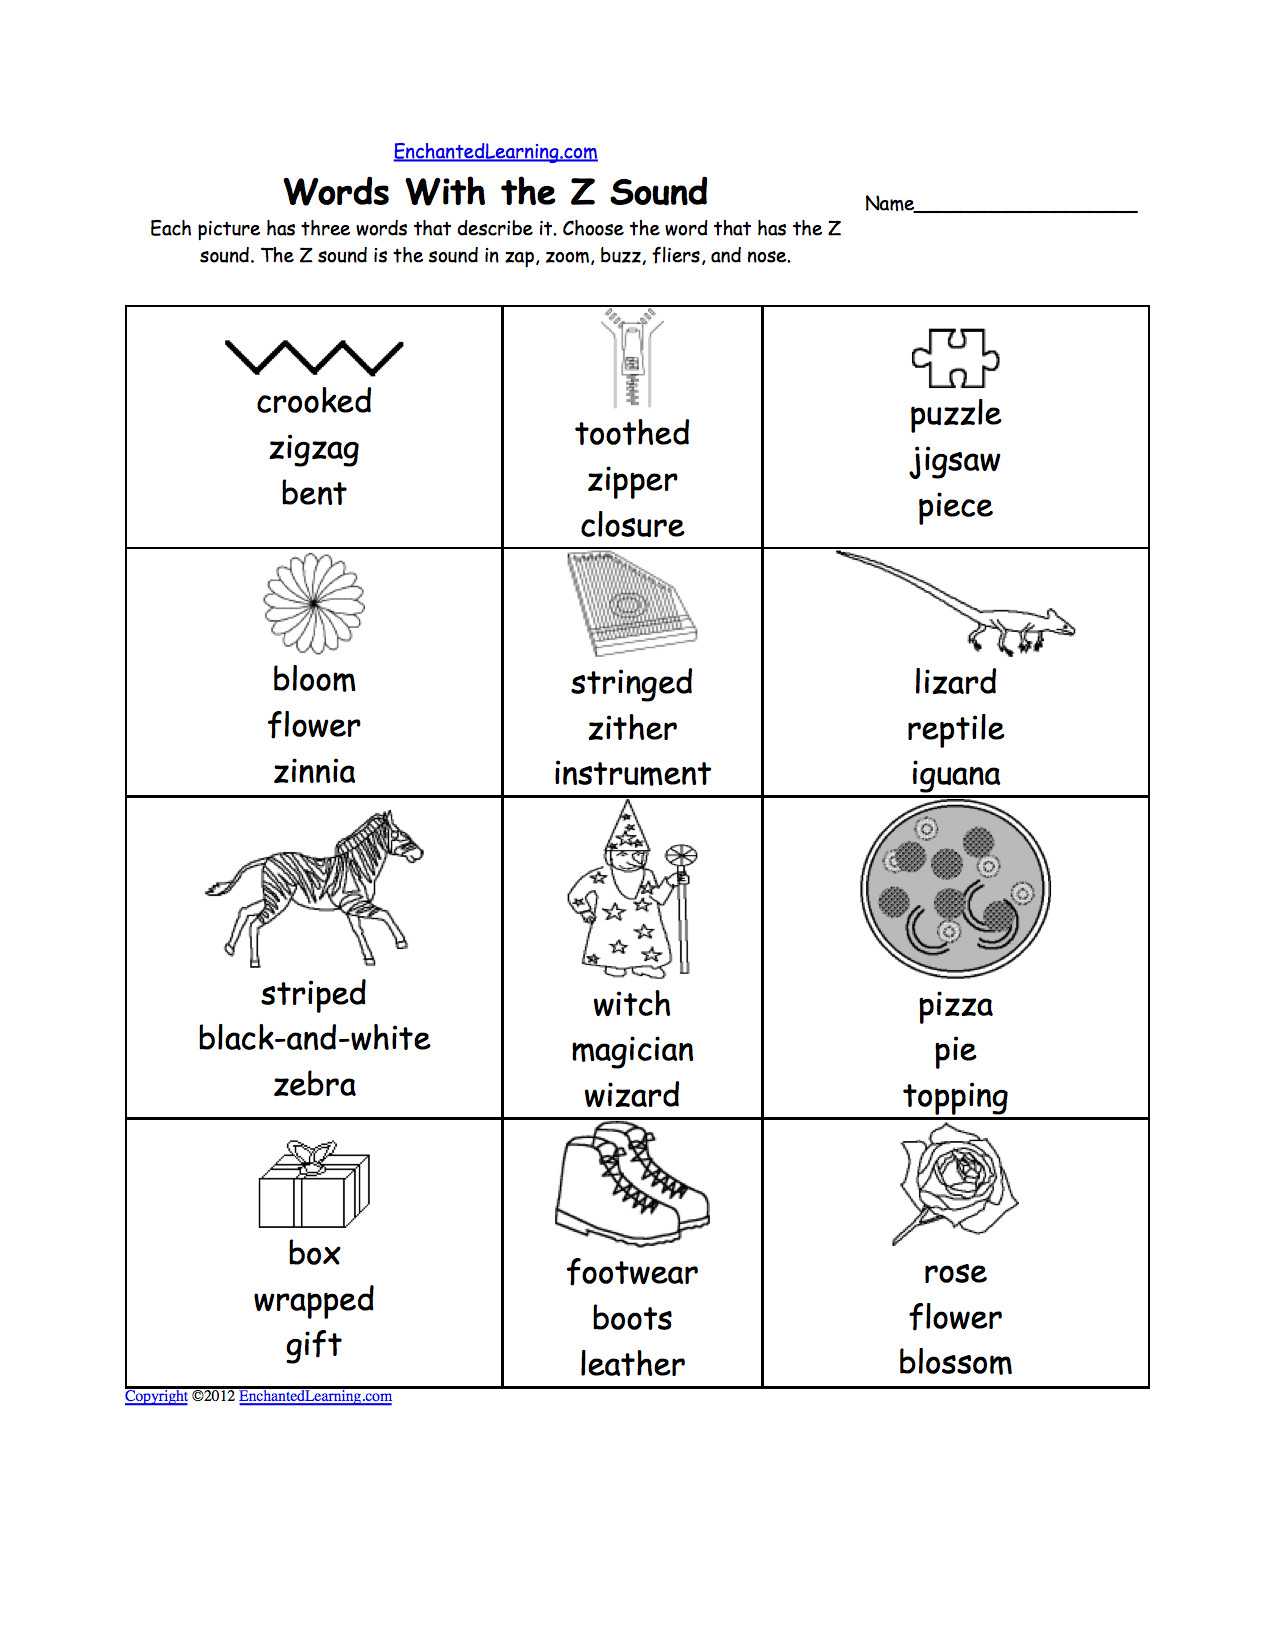 Afterlife the Strange Science Of Decay Worksheet Answer Key or Alphabet Worksheets for Kindergarten A to Z Lovely Phonics Picture